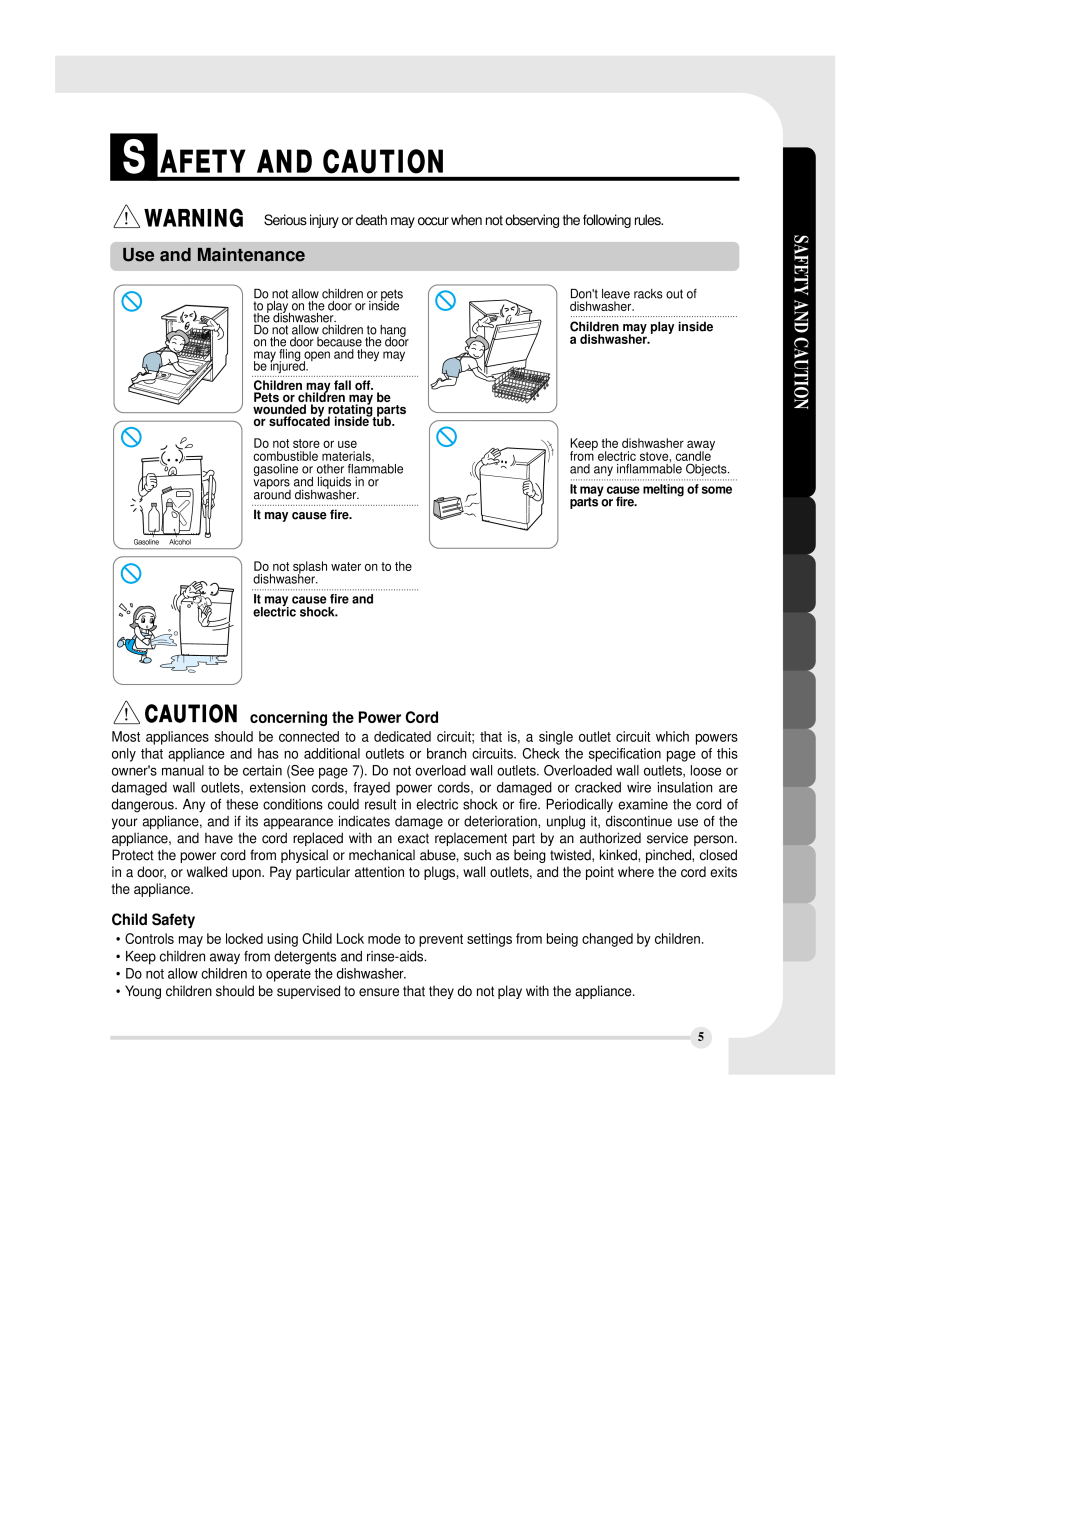 LG Electronics LDS 5811WW manual Use and Maintenance, CAUTION concerning the Power Cord, Child Safety, S Afety And Caution 